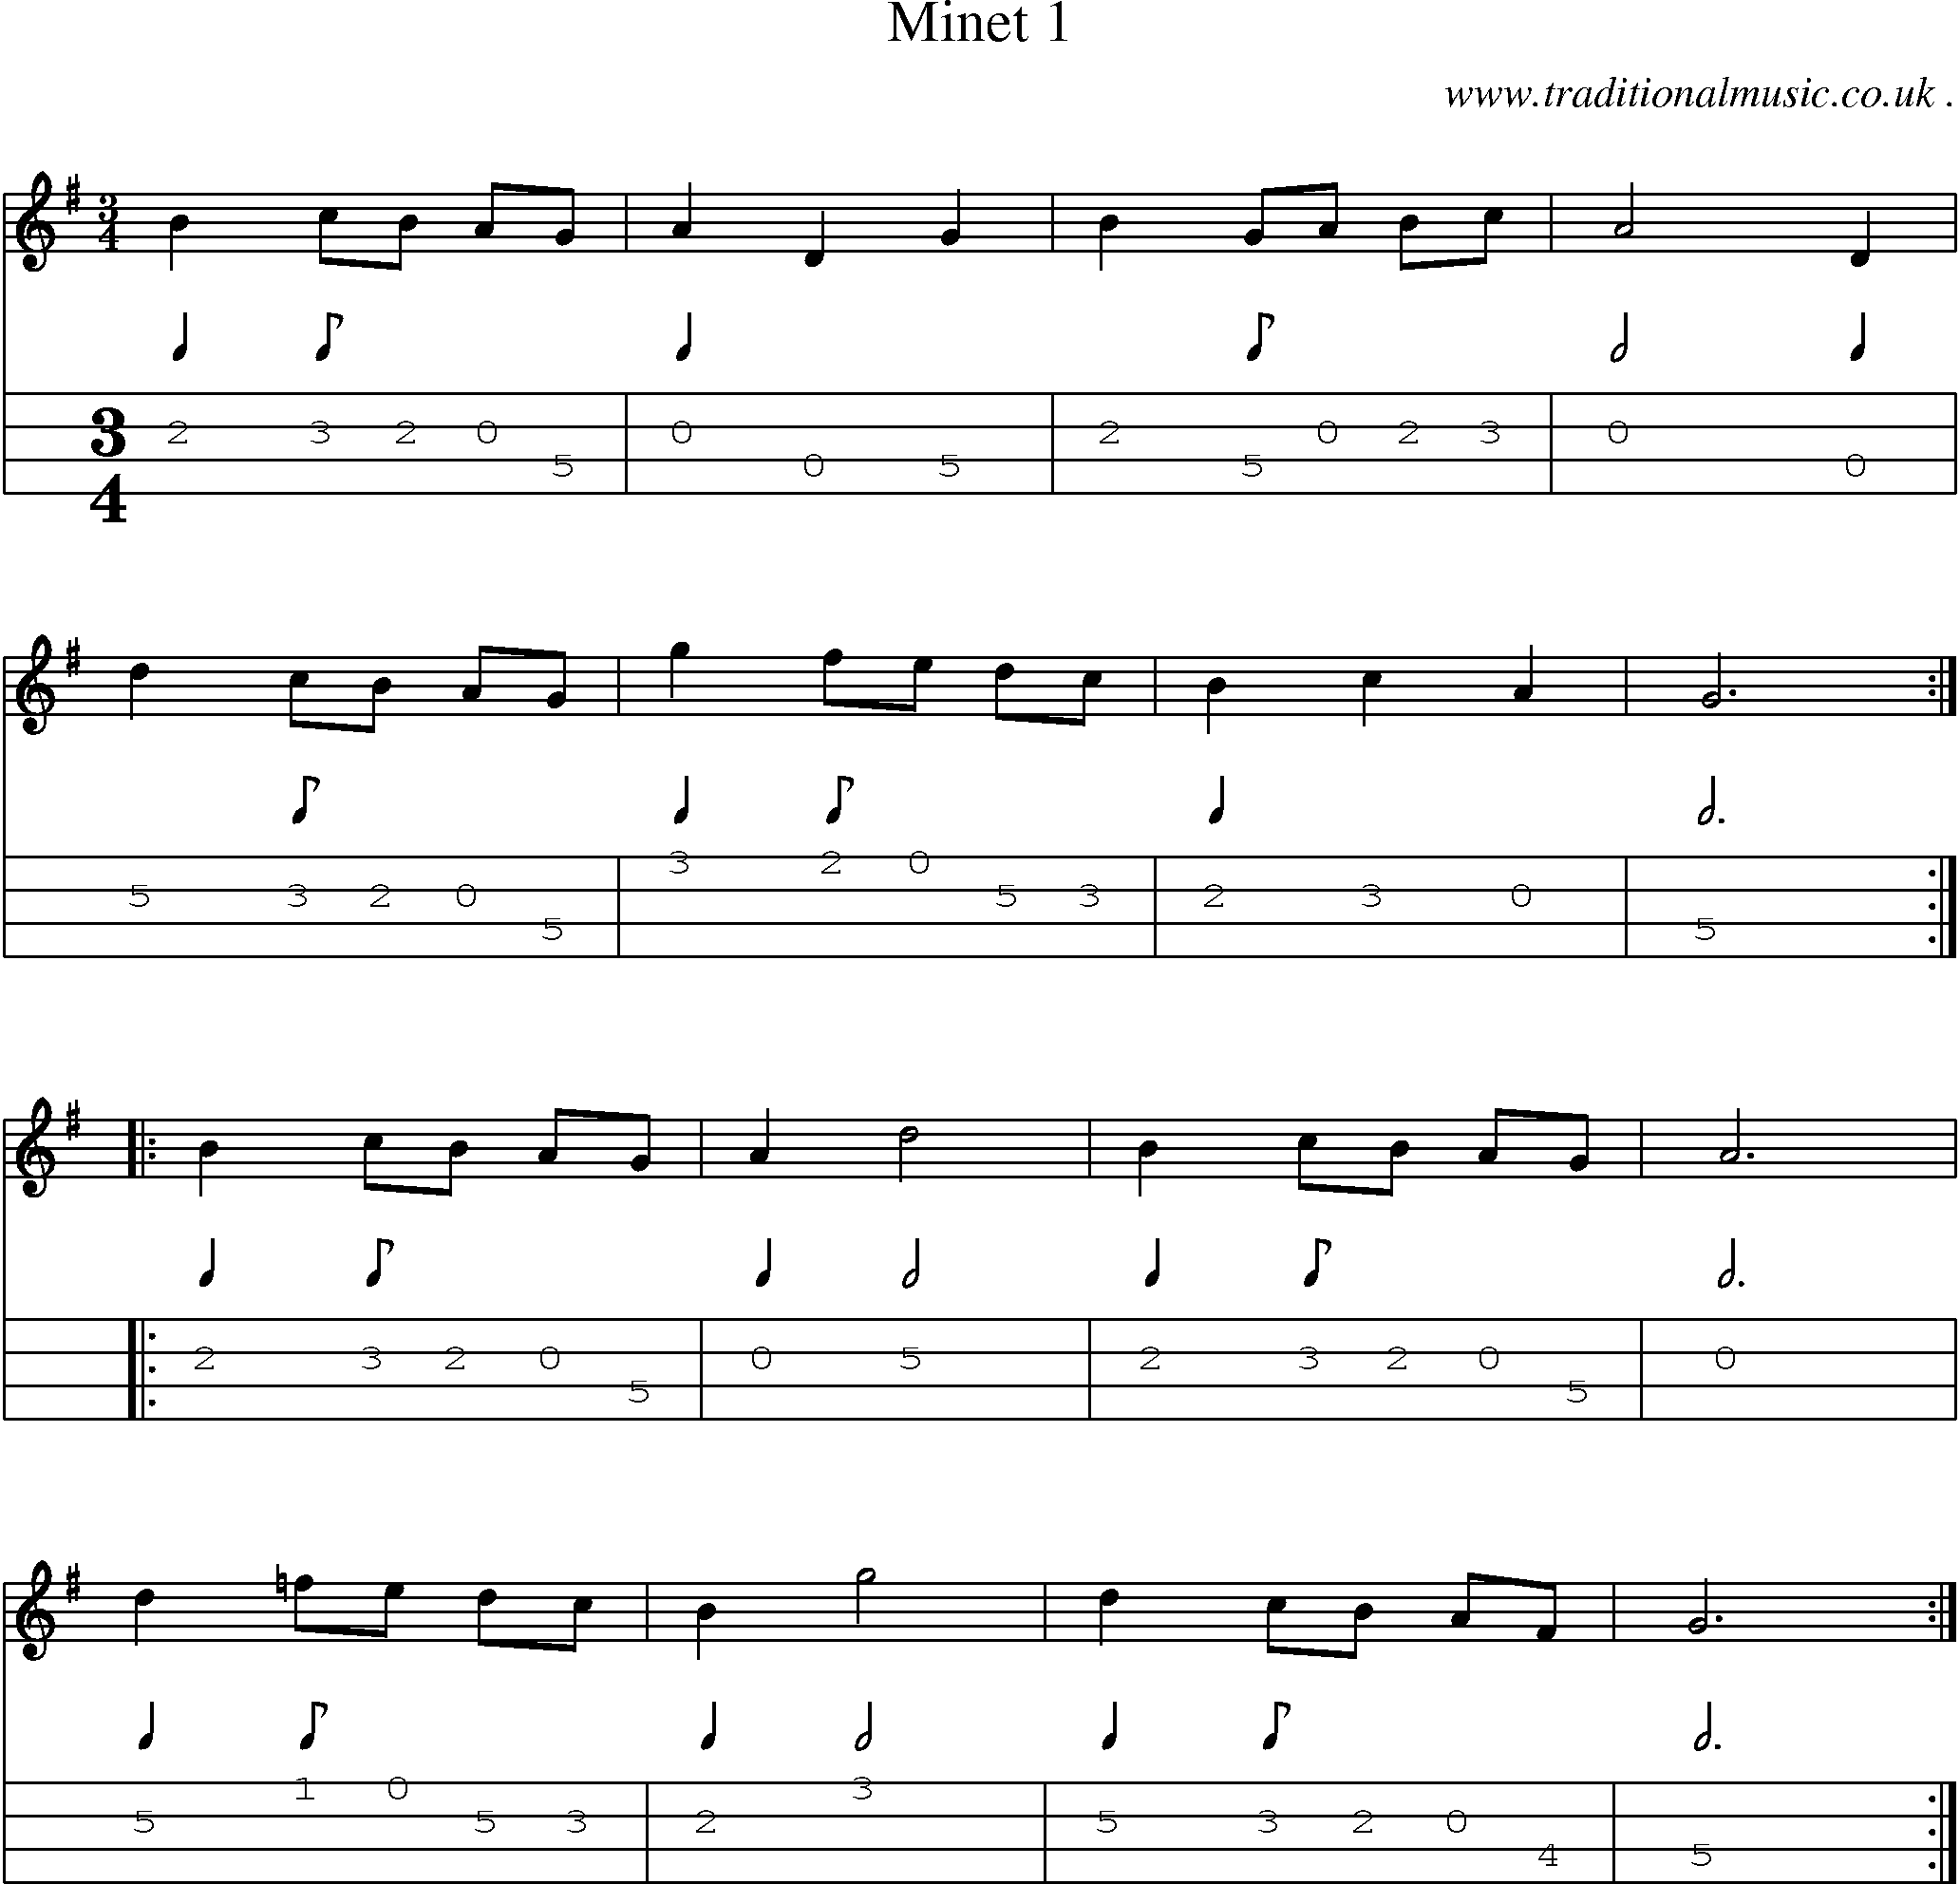 Sheet-Music and Mandolin Tabs for Minet 1